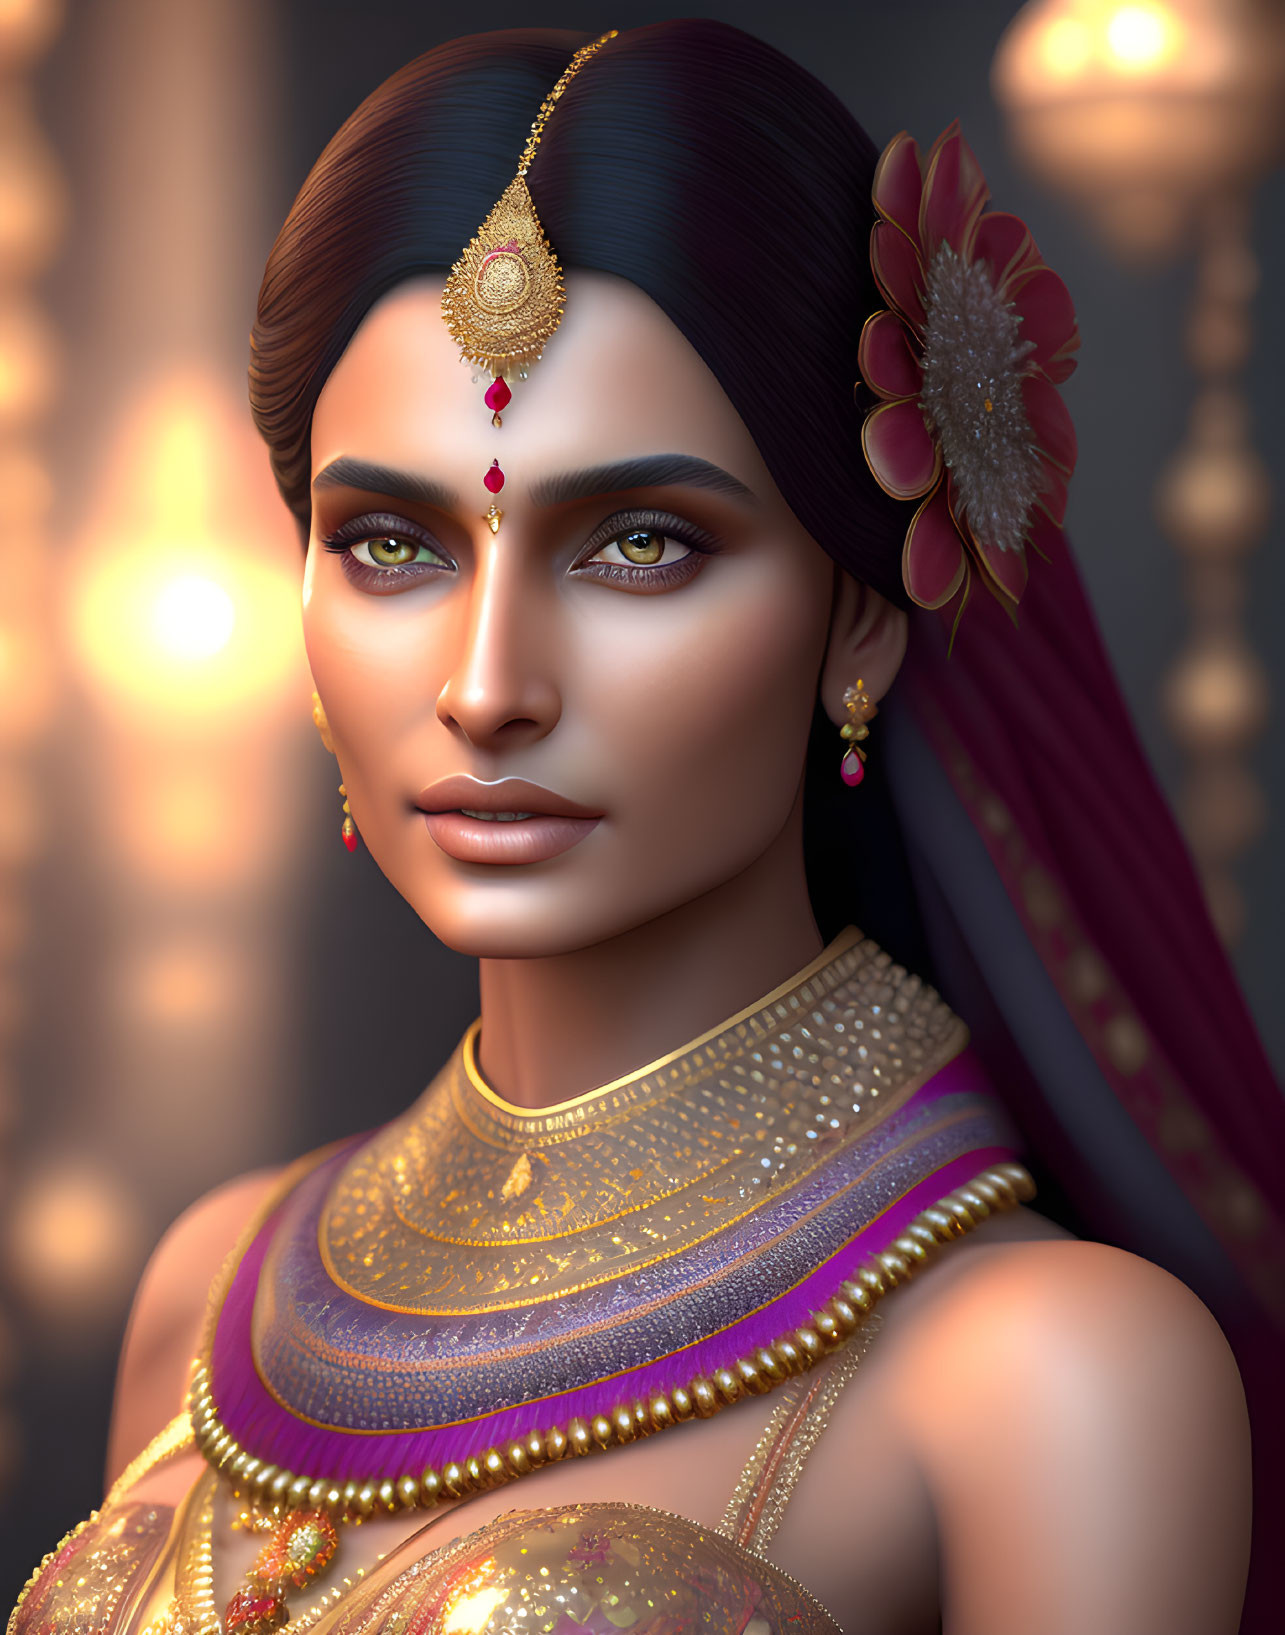 Traditional Indian jewelry on woman in 3D-rendered image